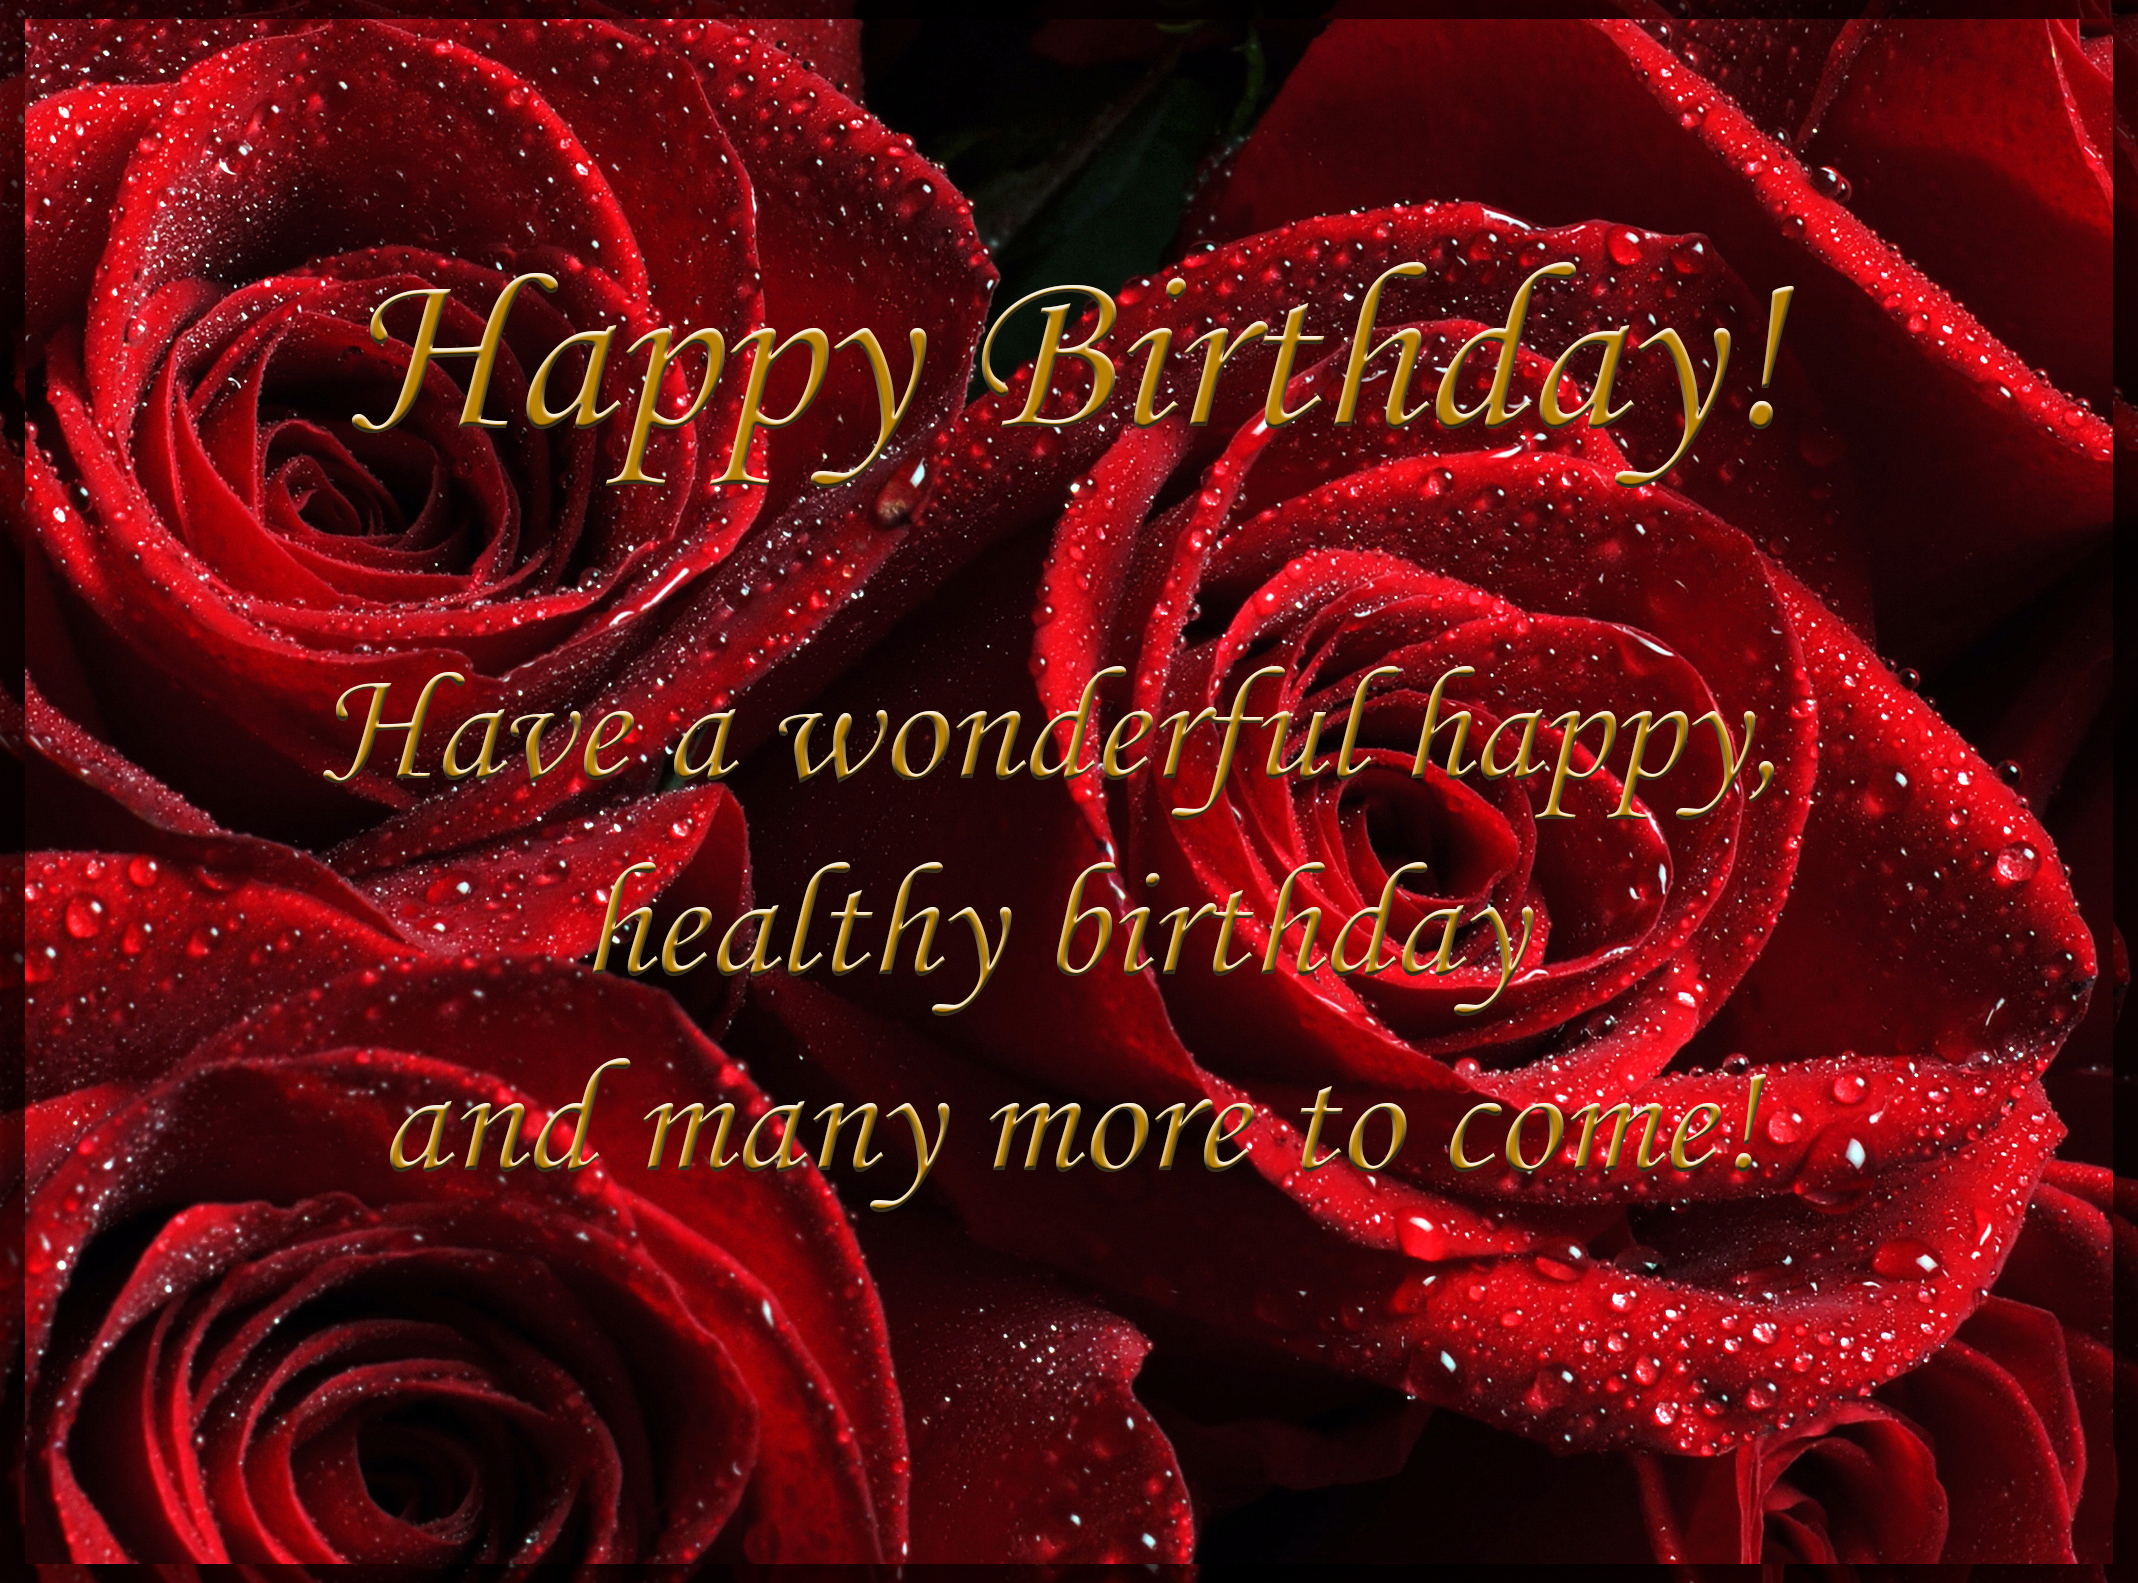 happy birthday wallpaper with red rose